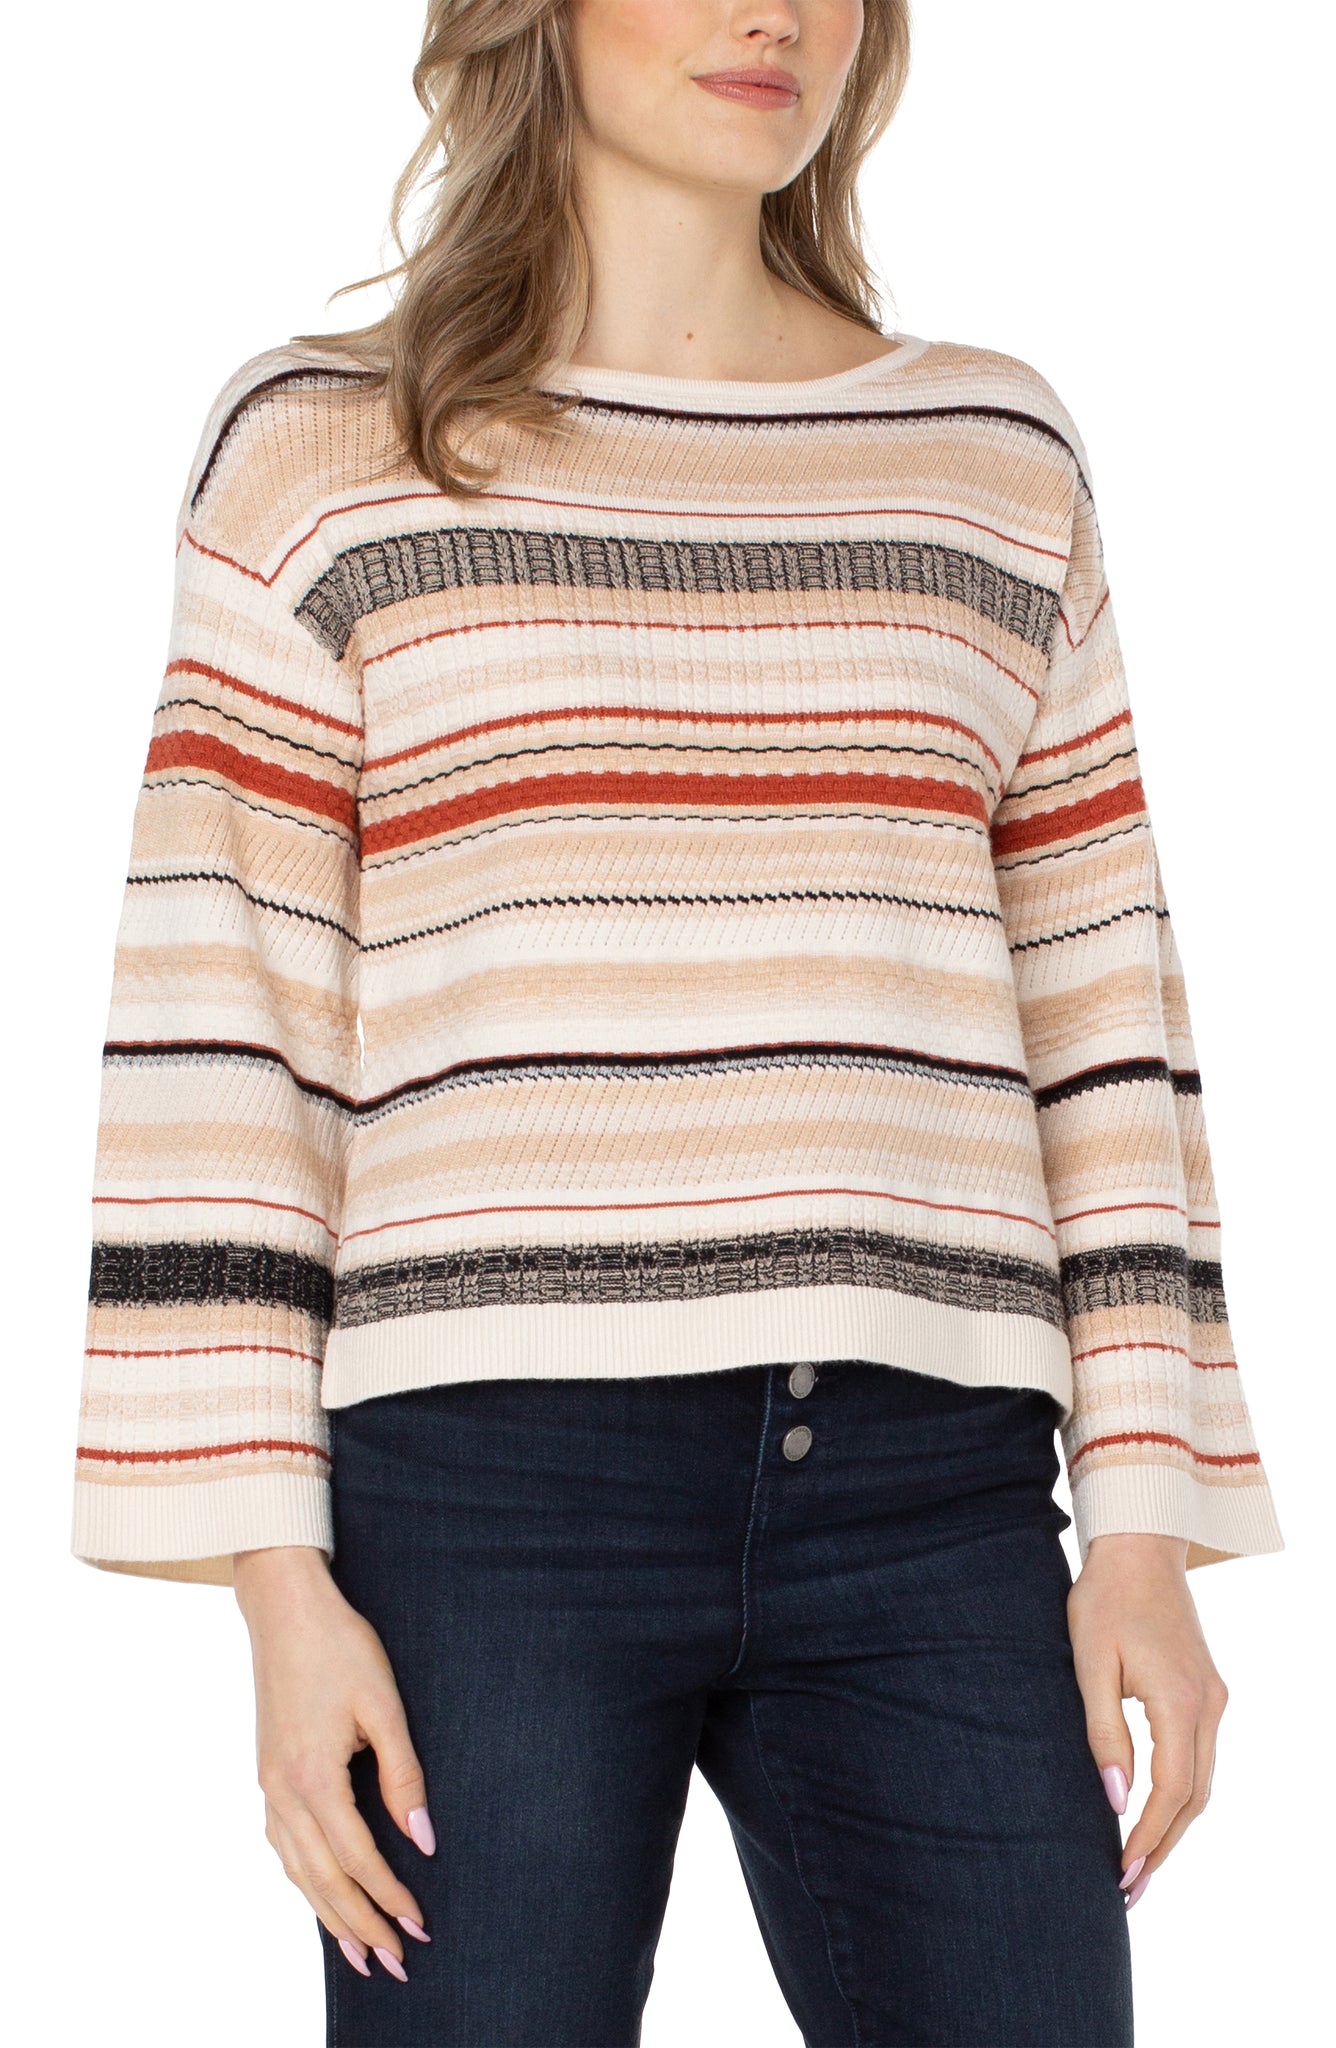 Boat Neck Textured Sweater